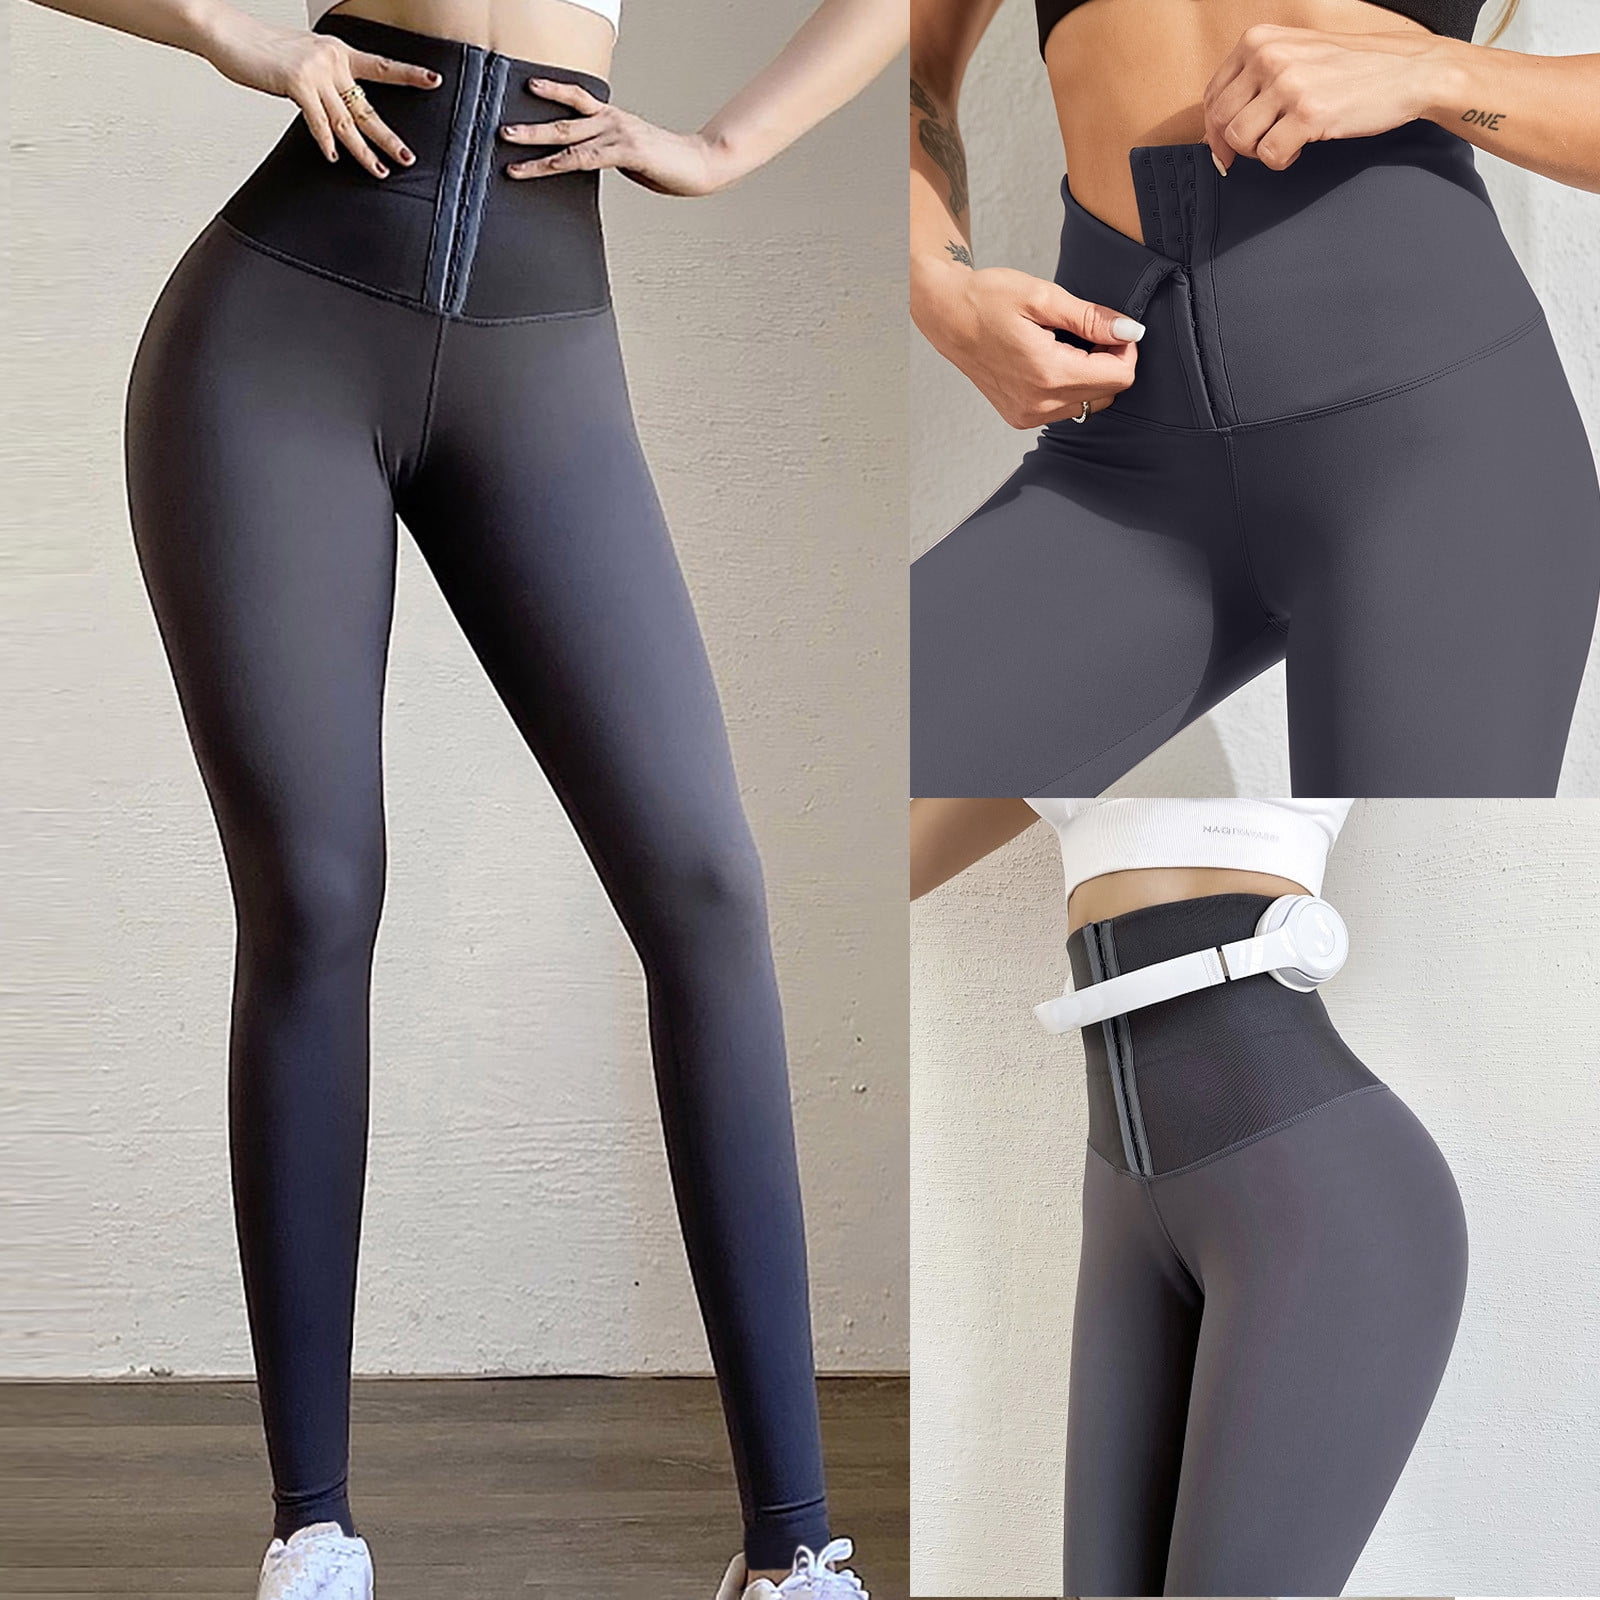 Kayannuo Yoga Pants Women Christmas Clearance Women Sport Fitness Yoga  Pants High Waist Body Shaping Breasted Elasticity Pants Gray 